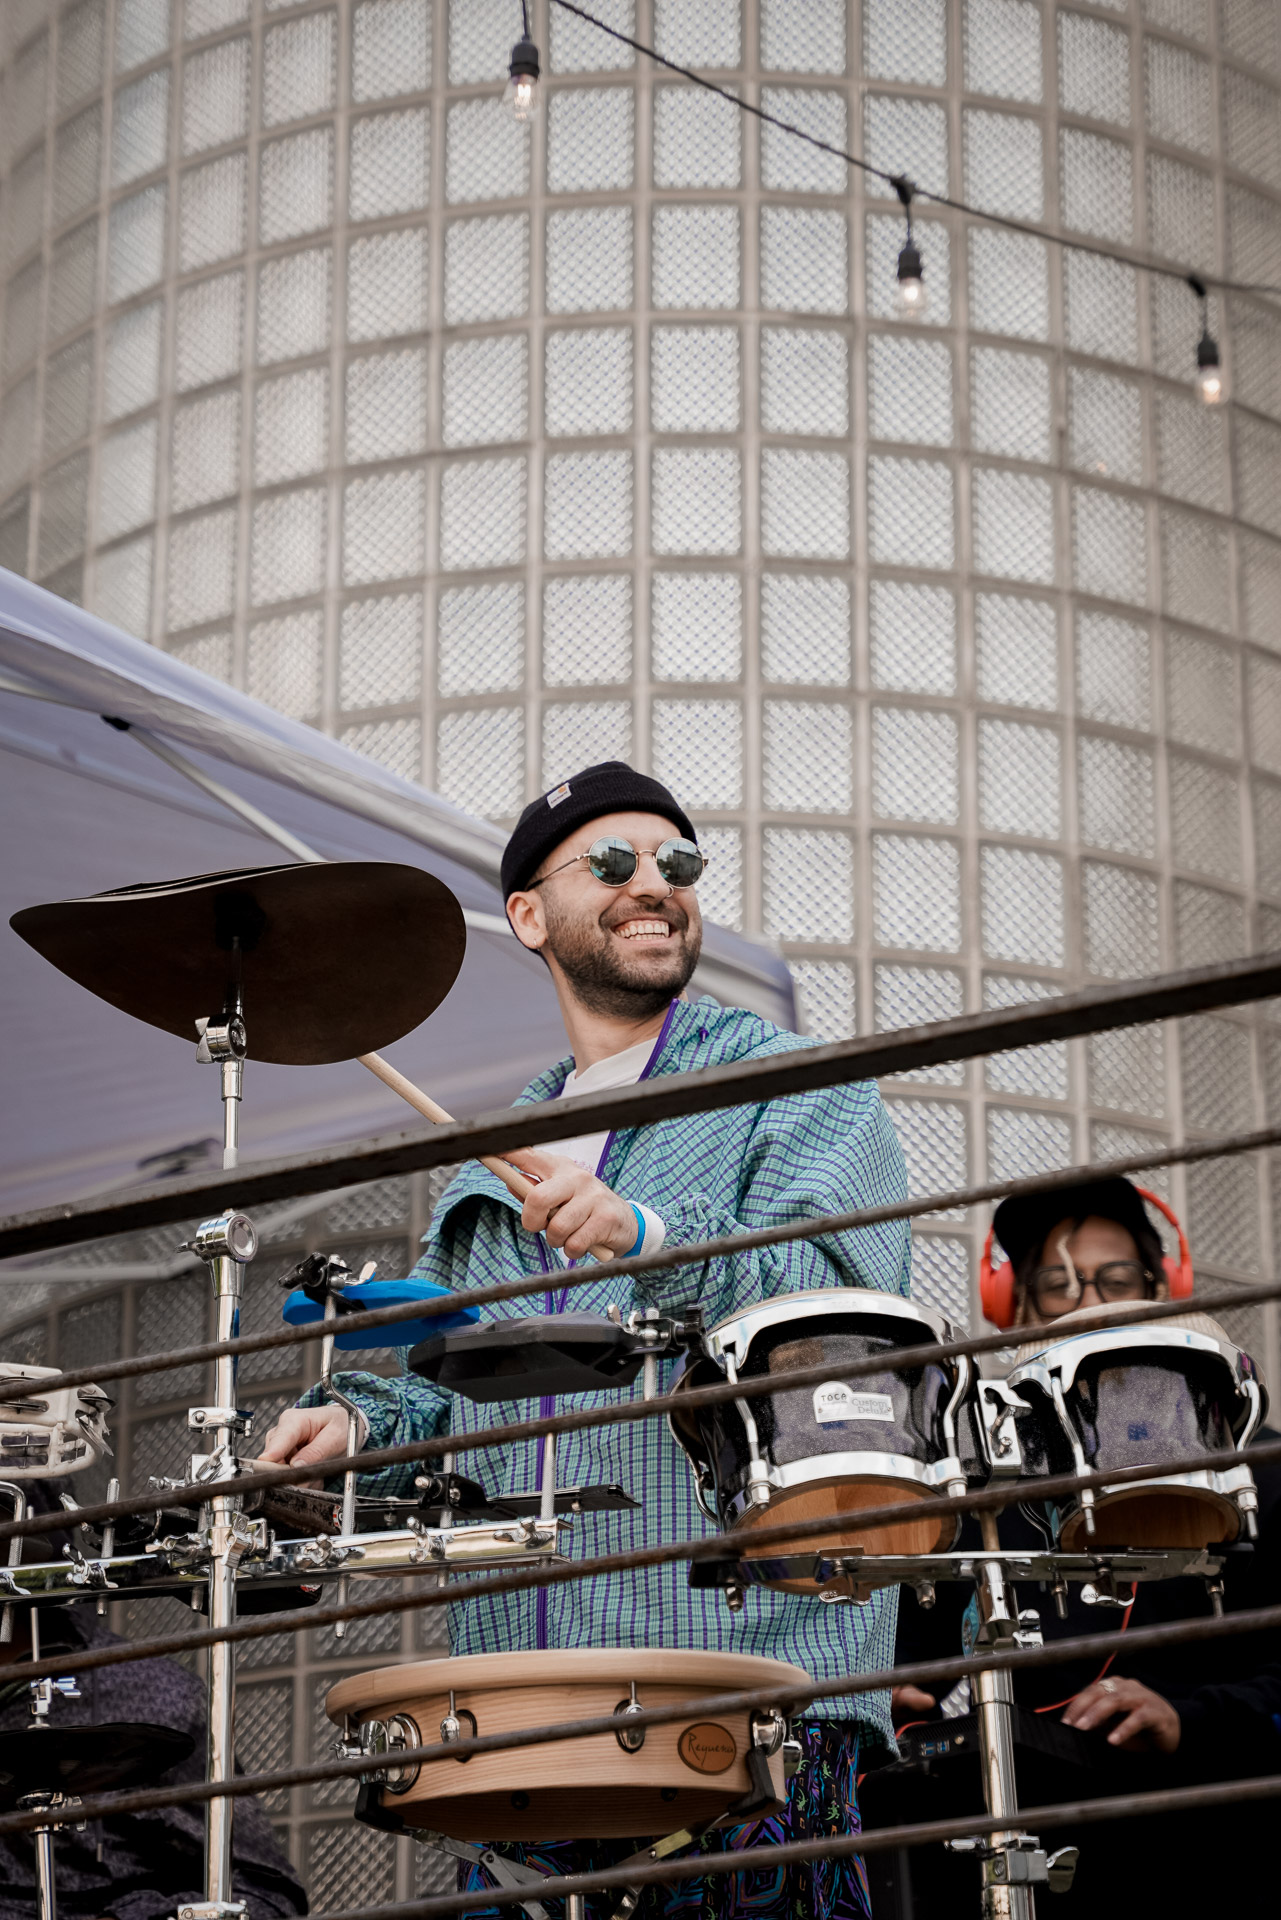 A percussionist playing on stage and smiling